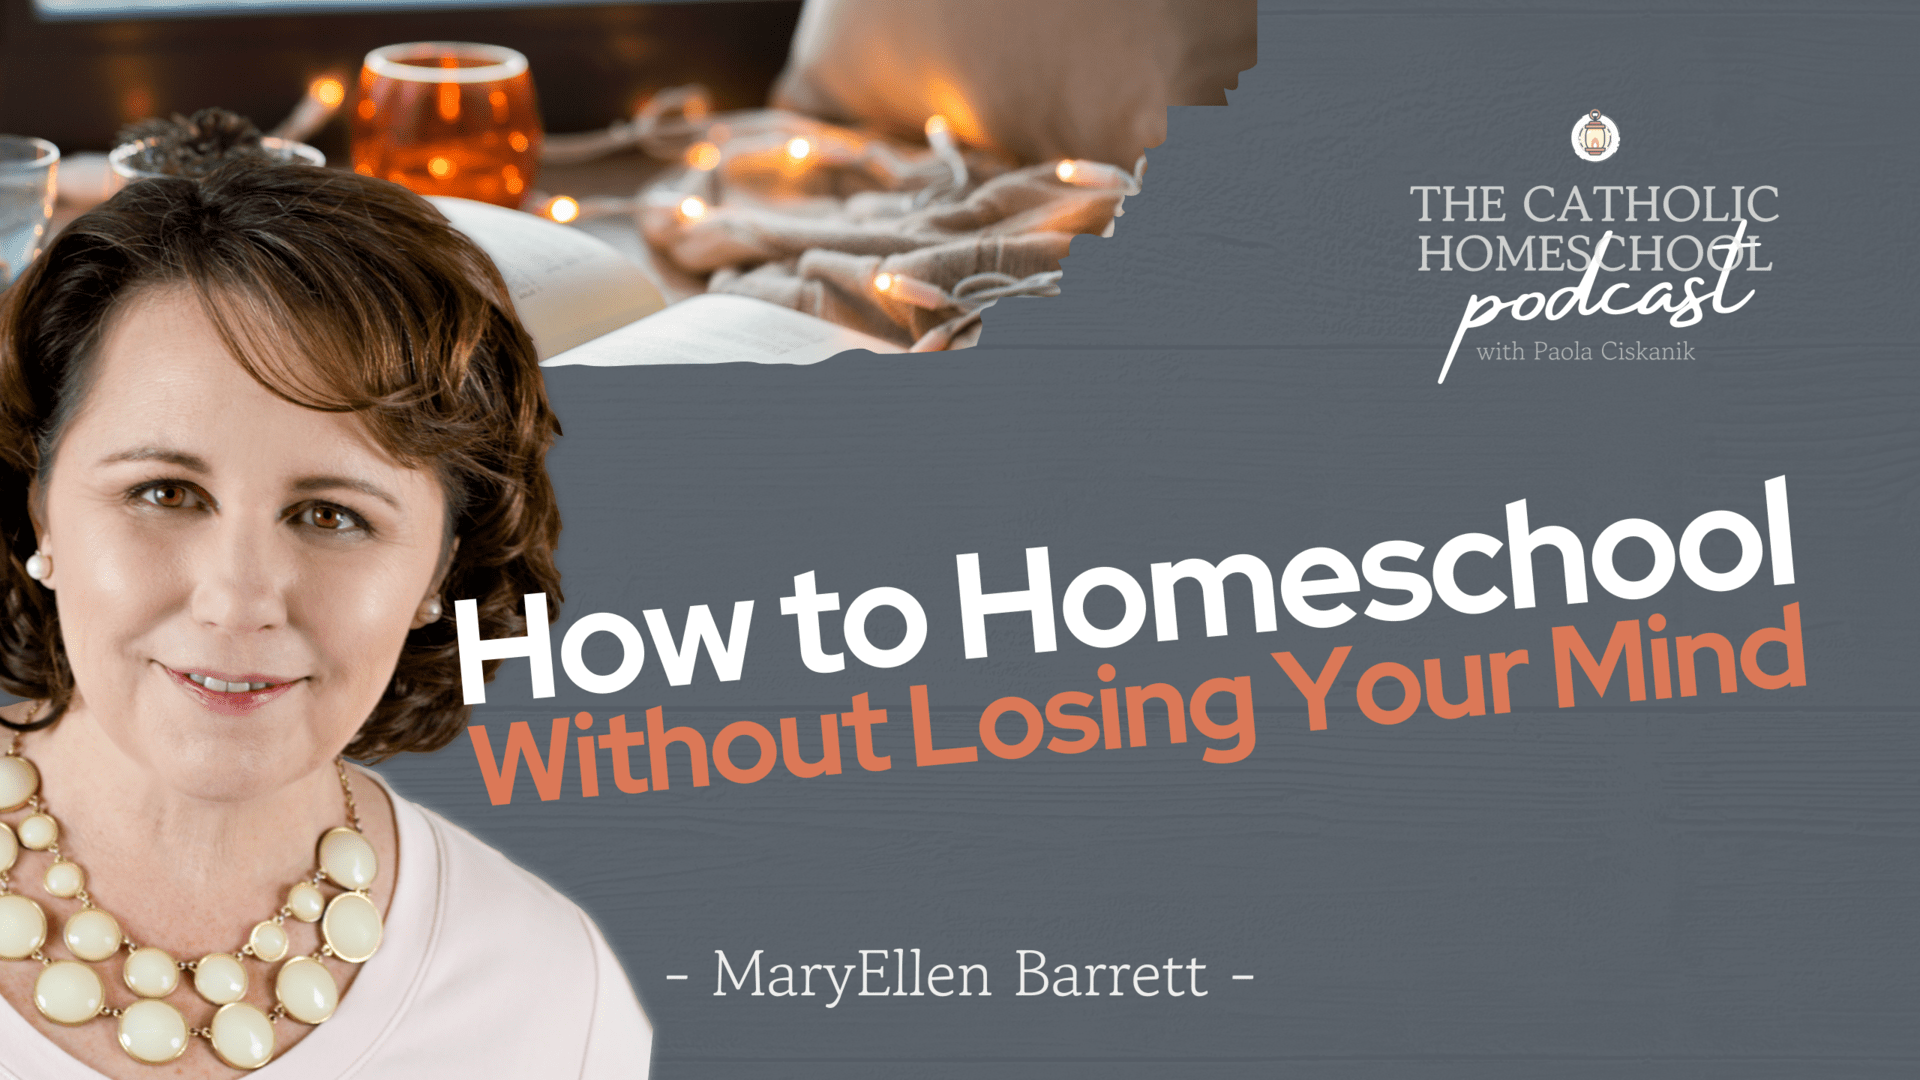 MaryEllen Barrett | How to Homeschool Without Losing Your Mind | The Catholic Homeschool Podcast